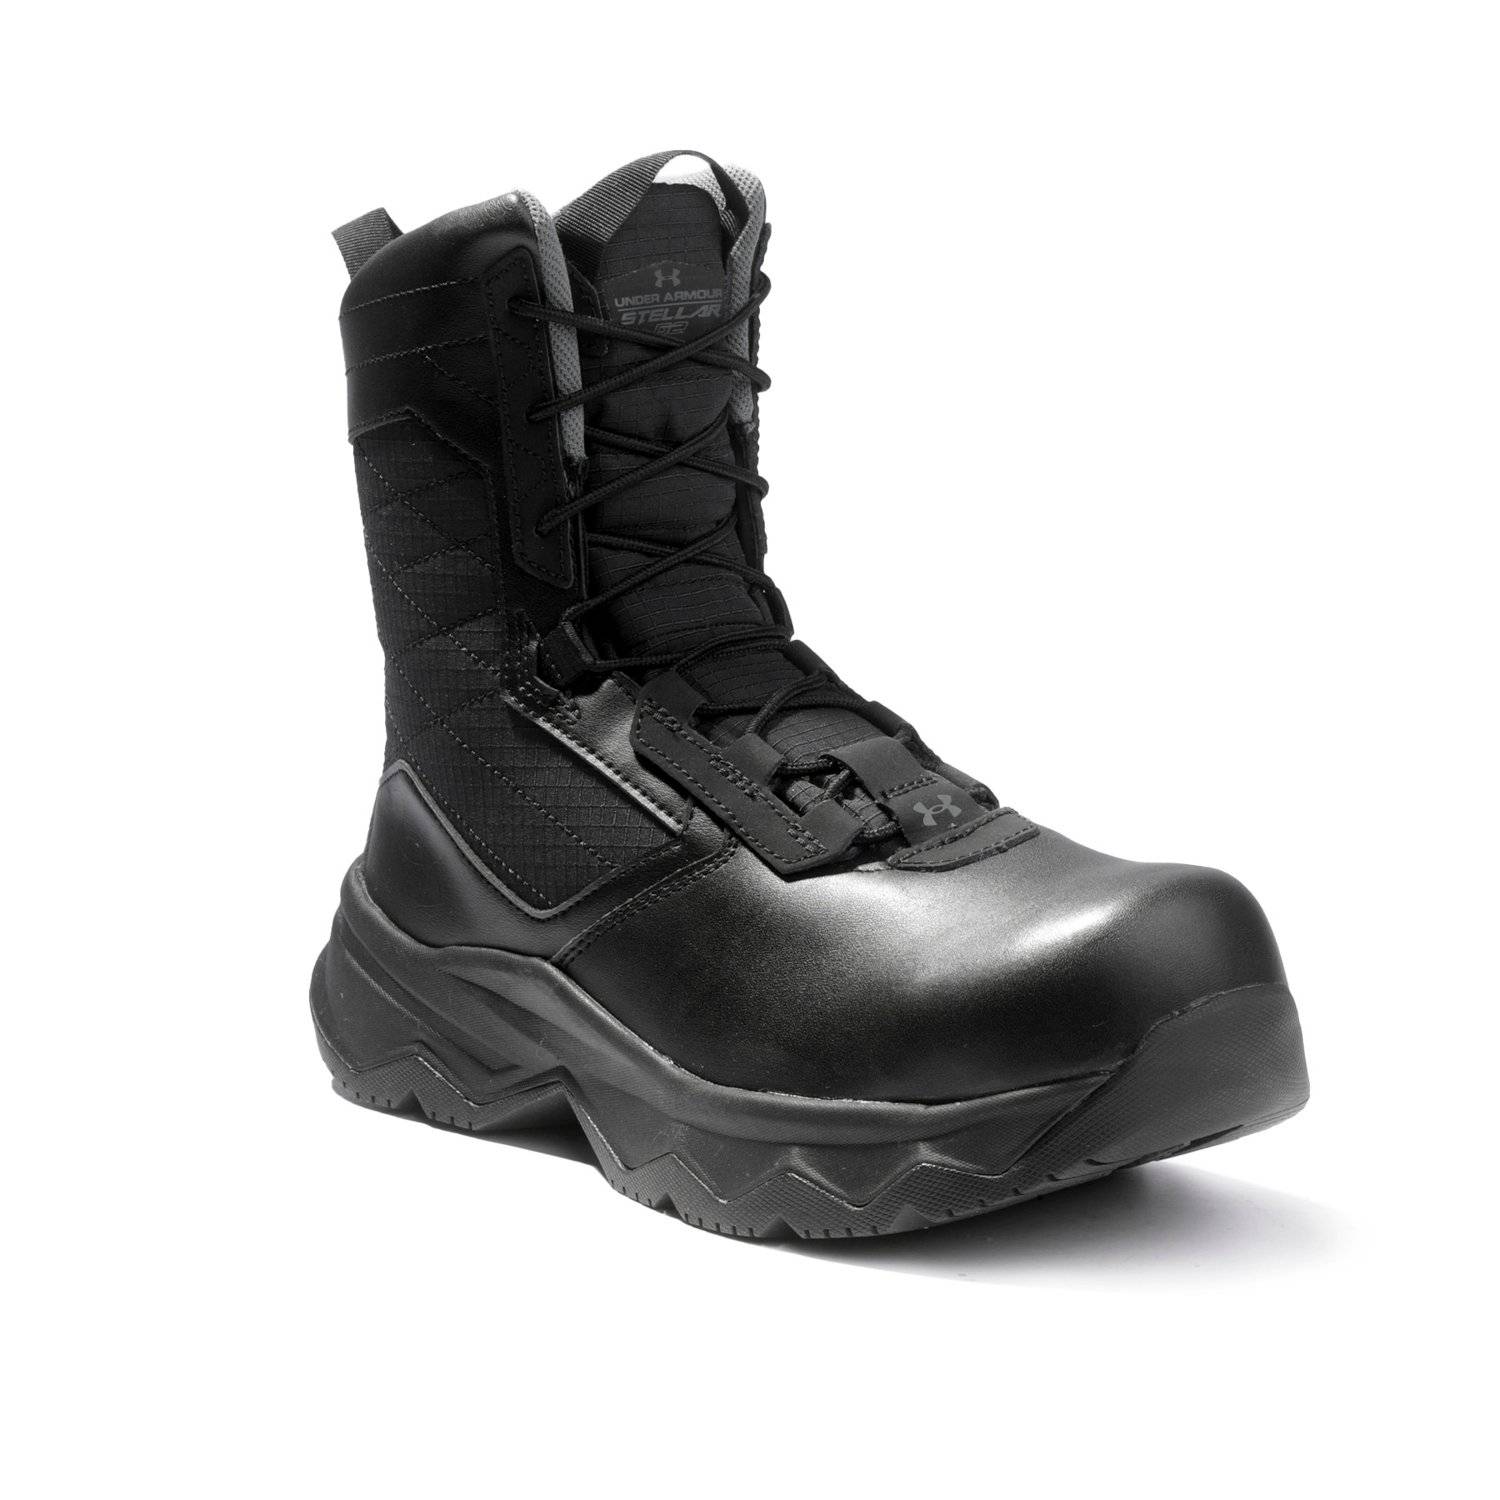 Under Armour Stellar G2 Protect Composite Toe Boots